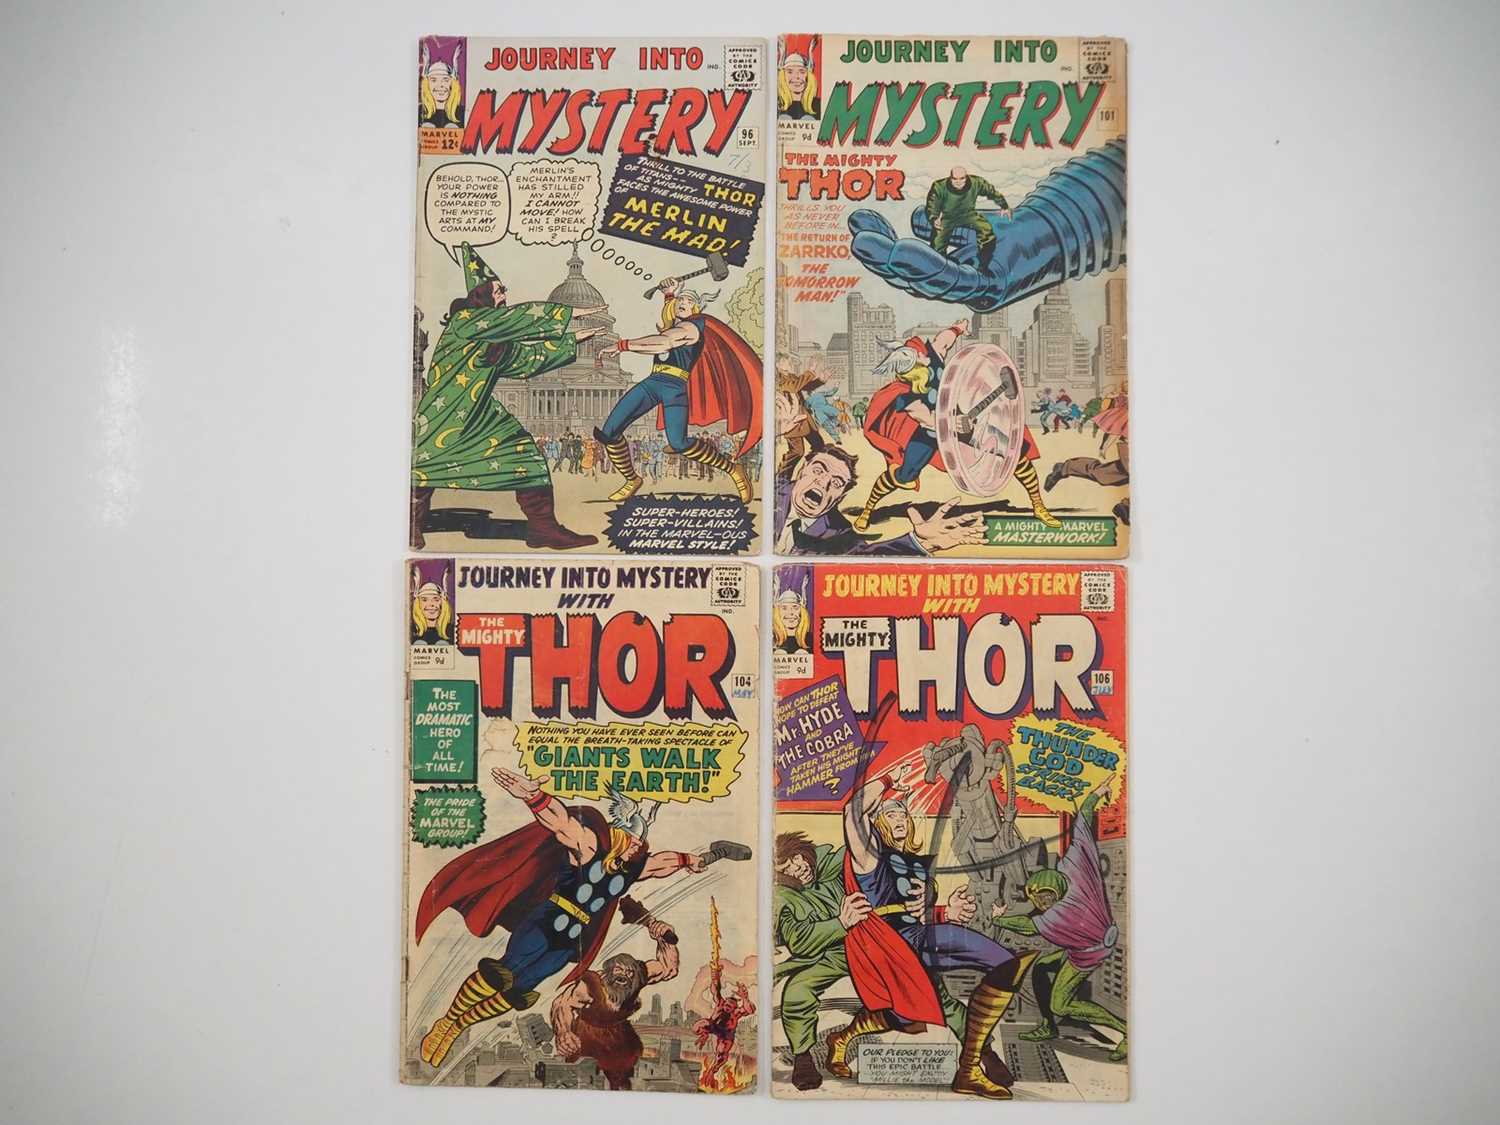 JOURNEY INTO MYSTERY #96, 101, 104, 106 (4 in Lot) - (1963/1964 - MARVEL US & UK Price Variant) -